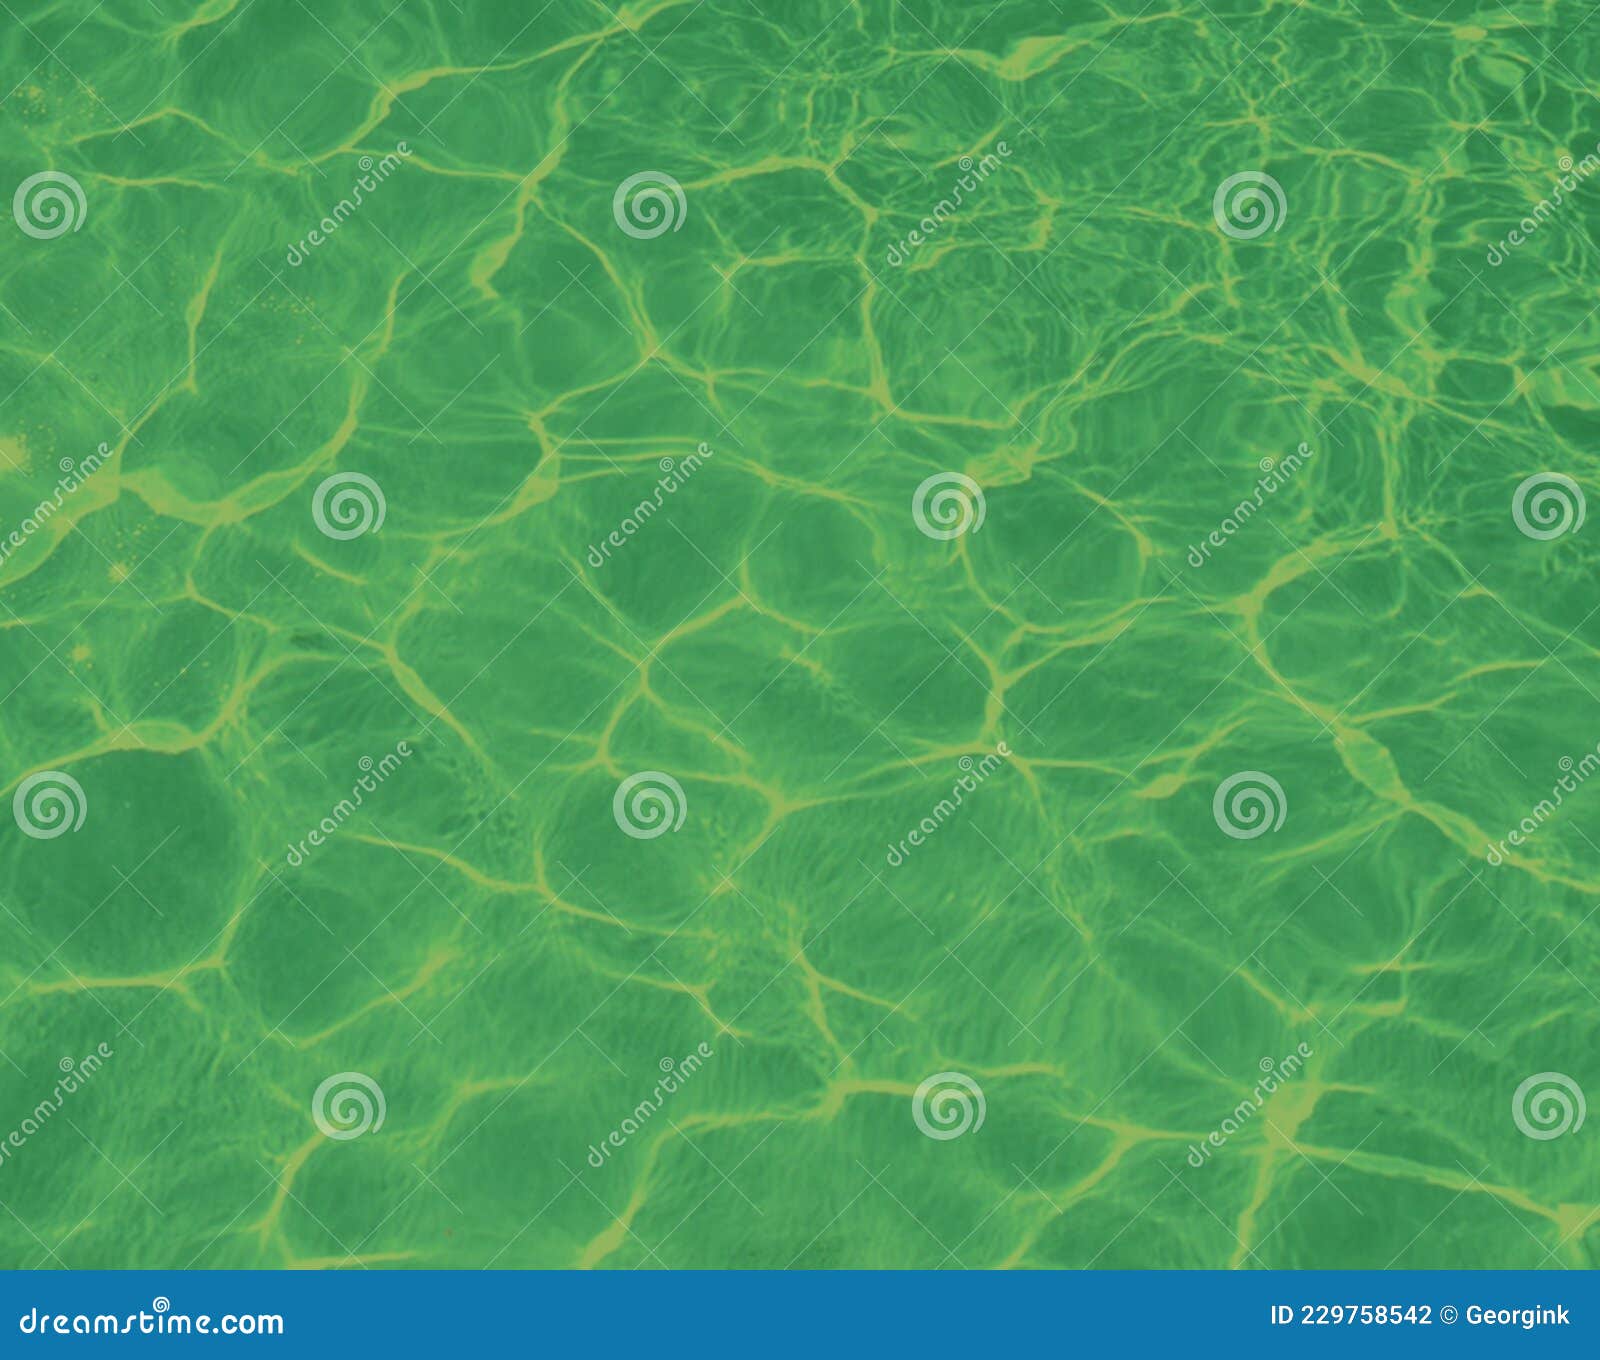 green.water overlay abstracting banner or background